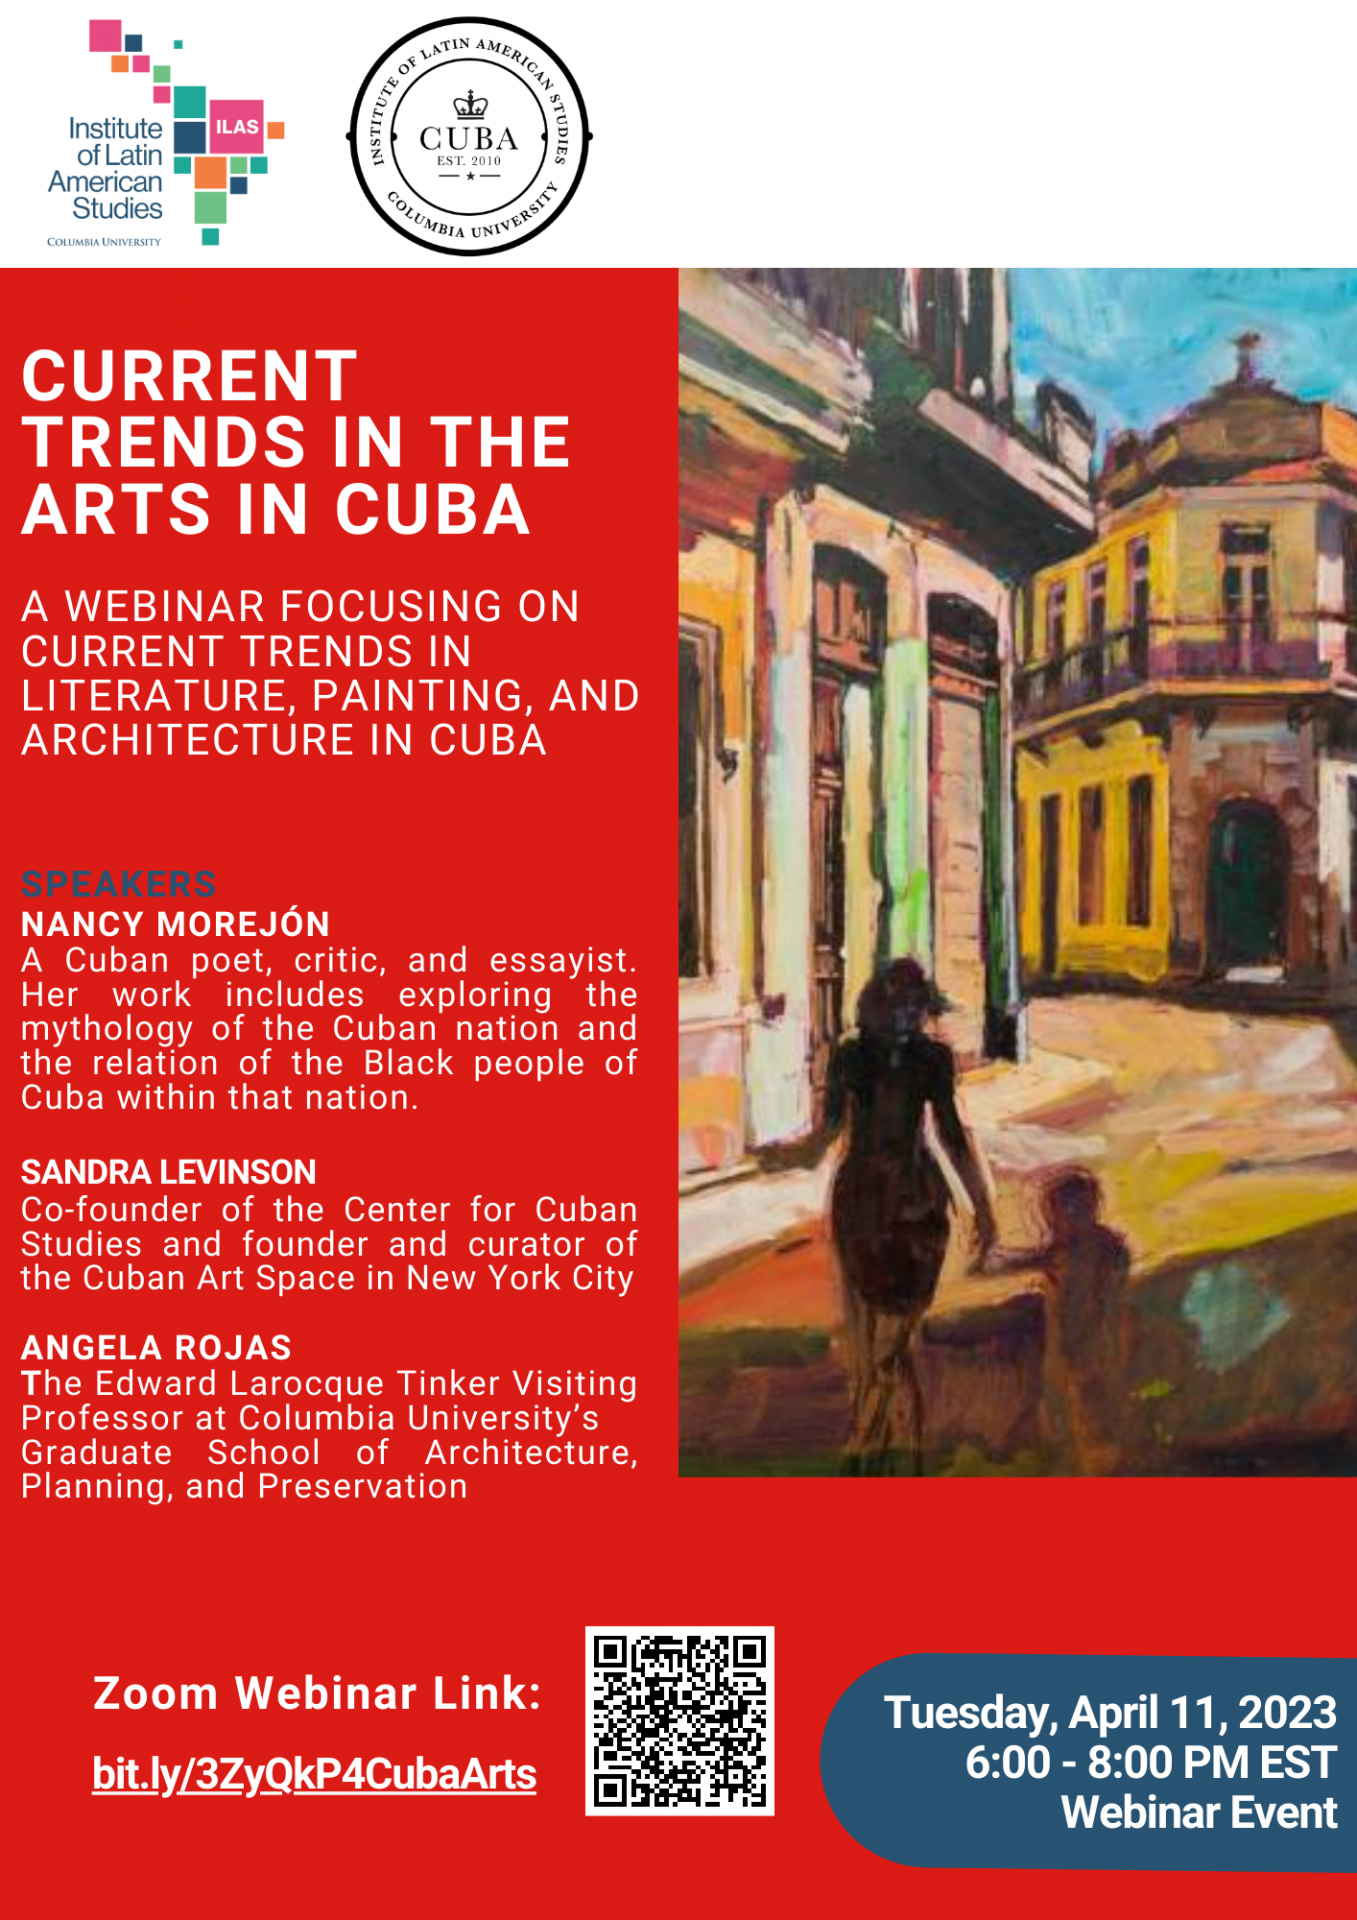 Event poster with image of cuban drawing